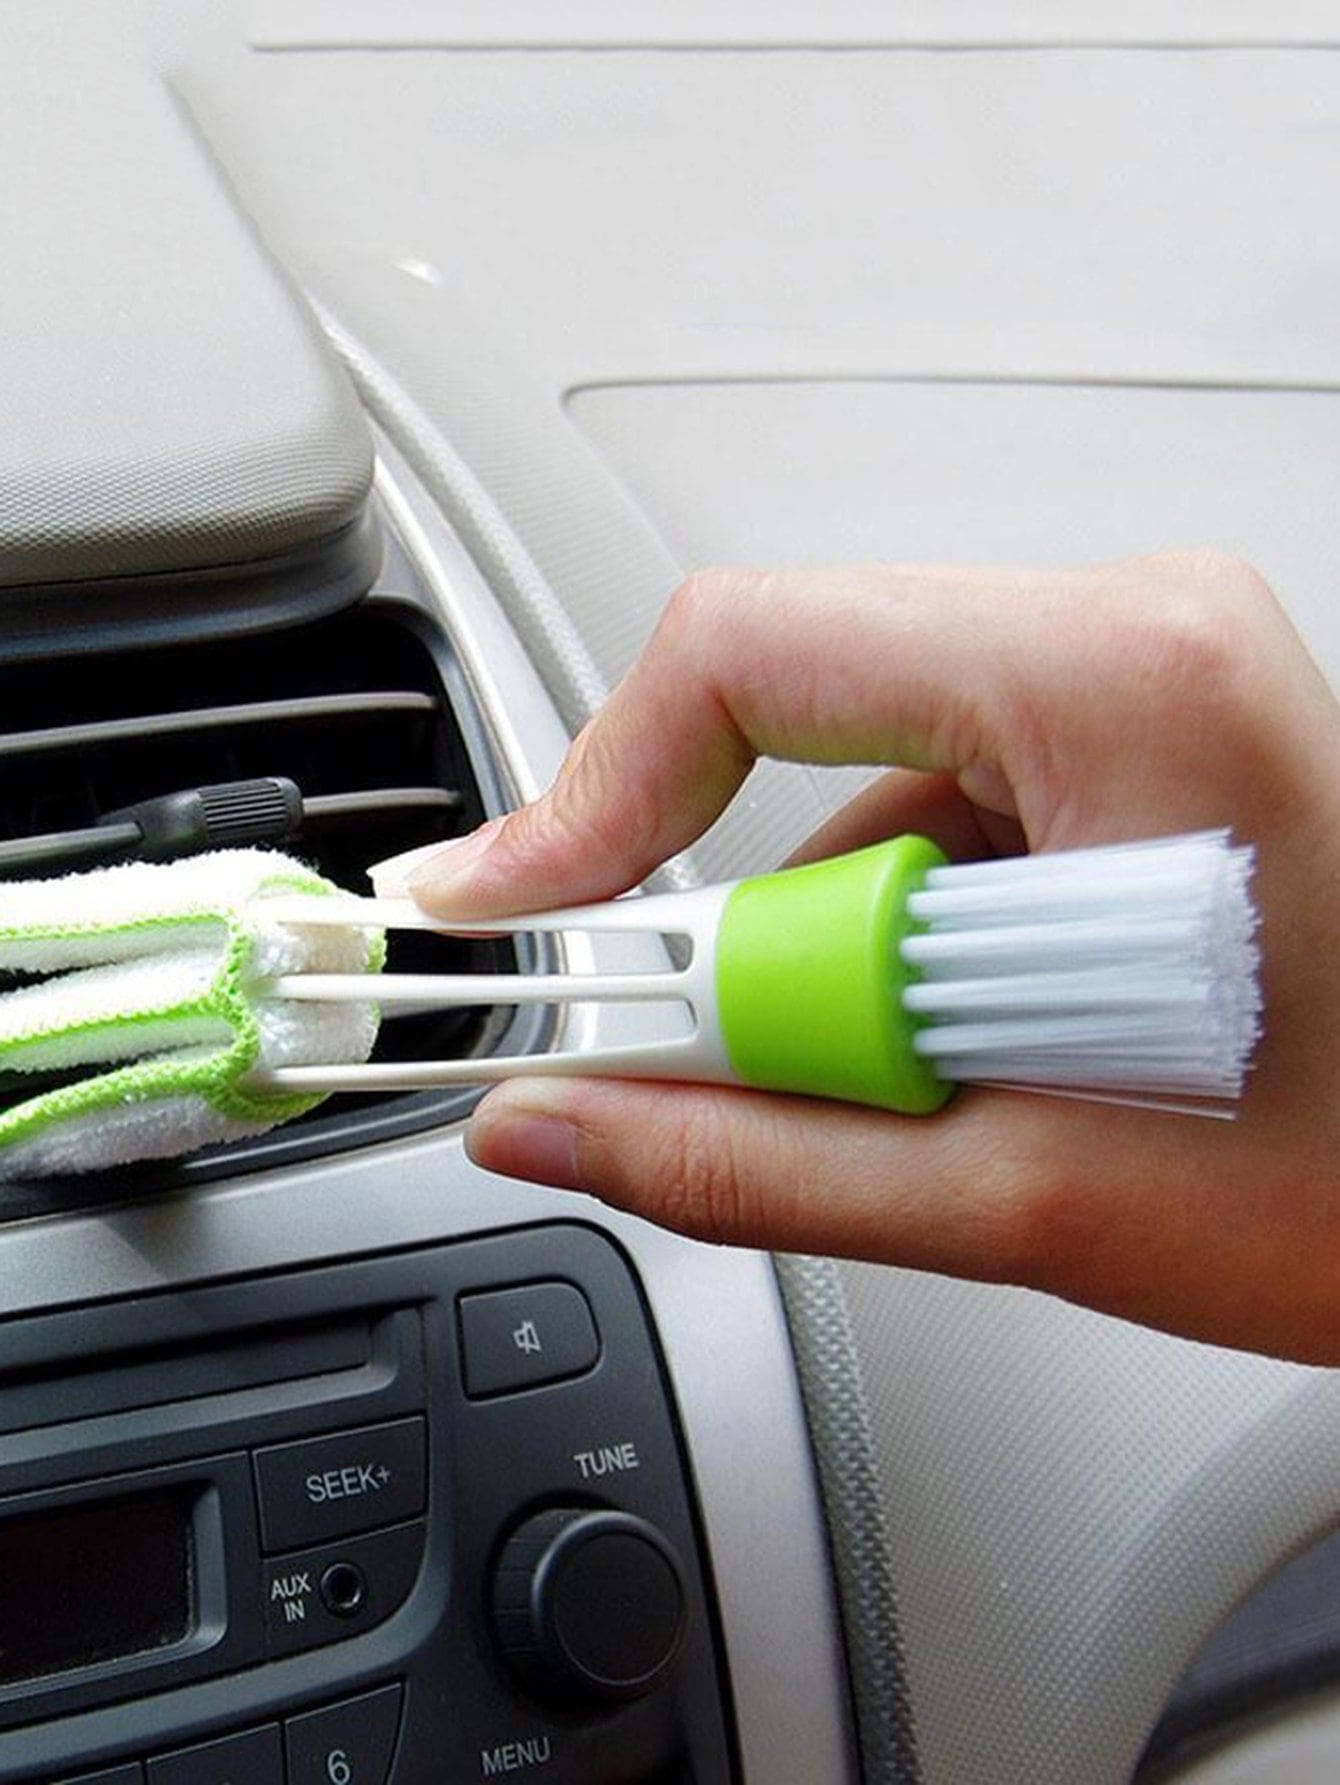 Keep Your Car's Air Conditioning System Clean & Fresh with this 2-in-1 Outlet Vent Brush